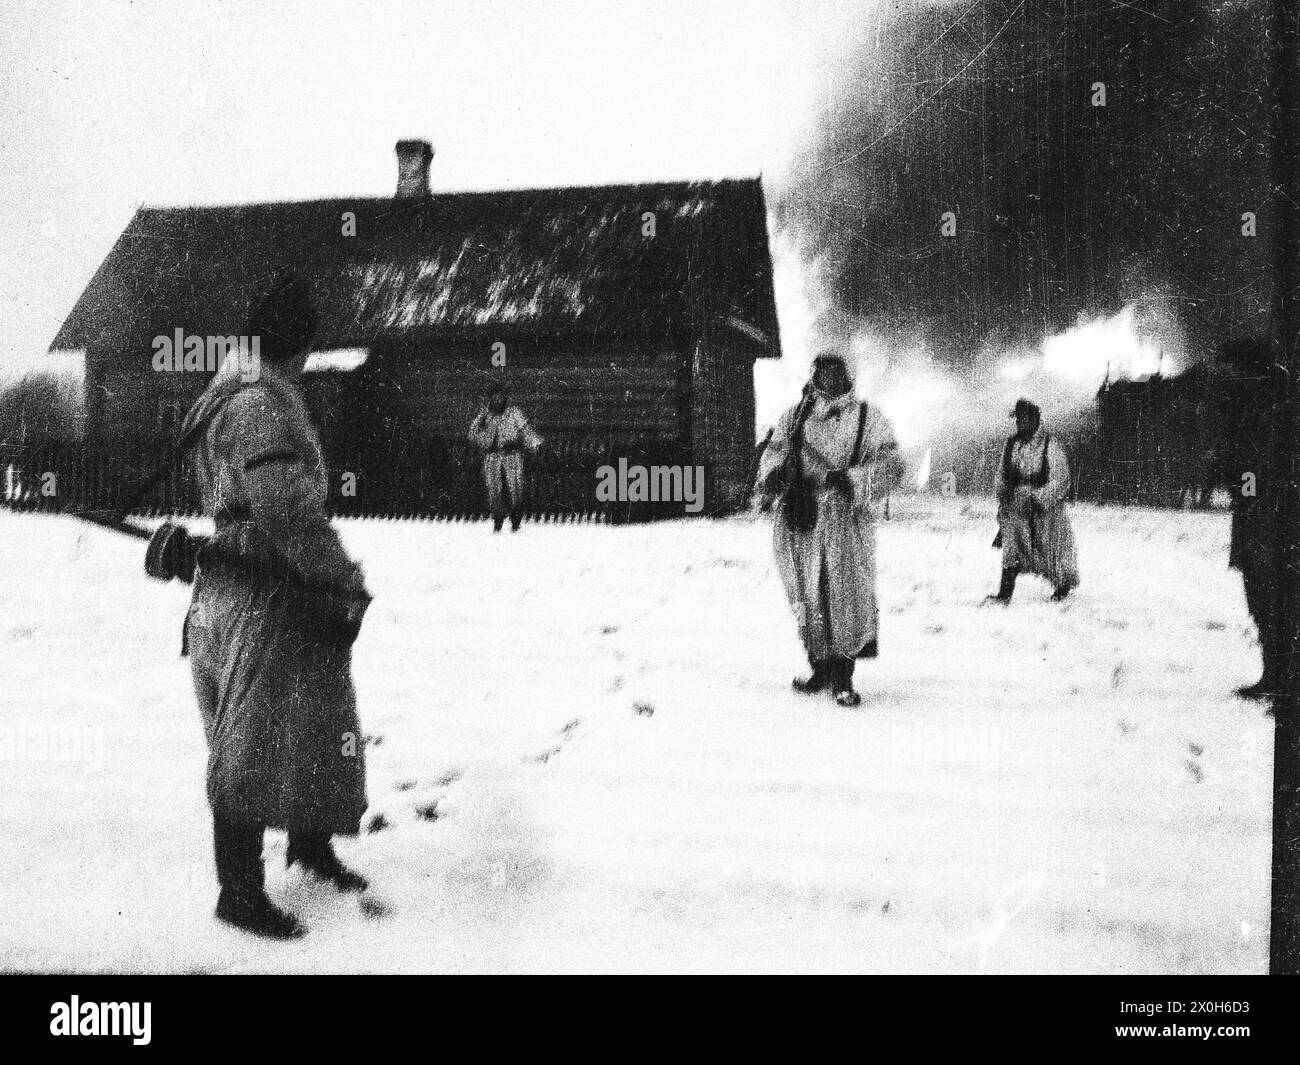 Soldiers in winter camouflage leave a burning village after fighting on the Eastern Front. The picture was taken in the rear of the Eastern Front, presumably in connection with battles with partisans. The picture was taken by a member of the Raffahrgrenadier Regiment 2 / Rahdfahrsicherungsregiment 2, in the northern section of the Eastern Front. [automated translation] Stock Photo